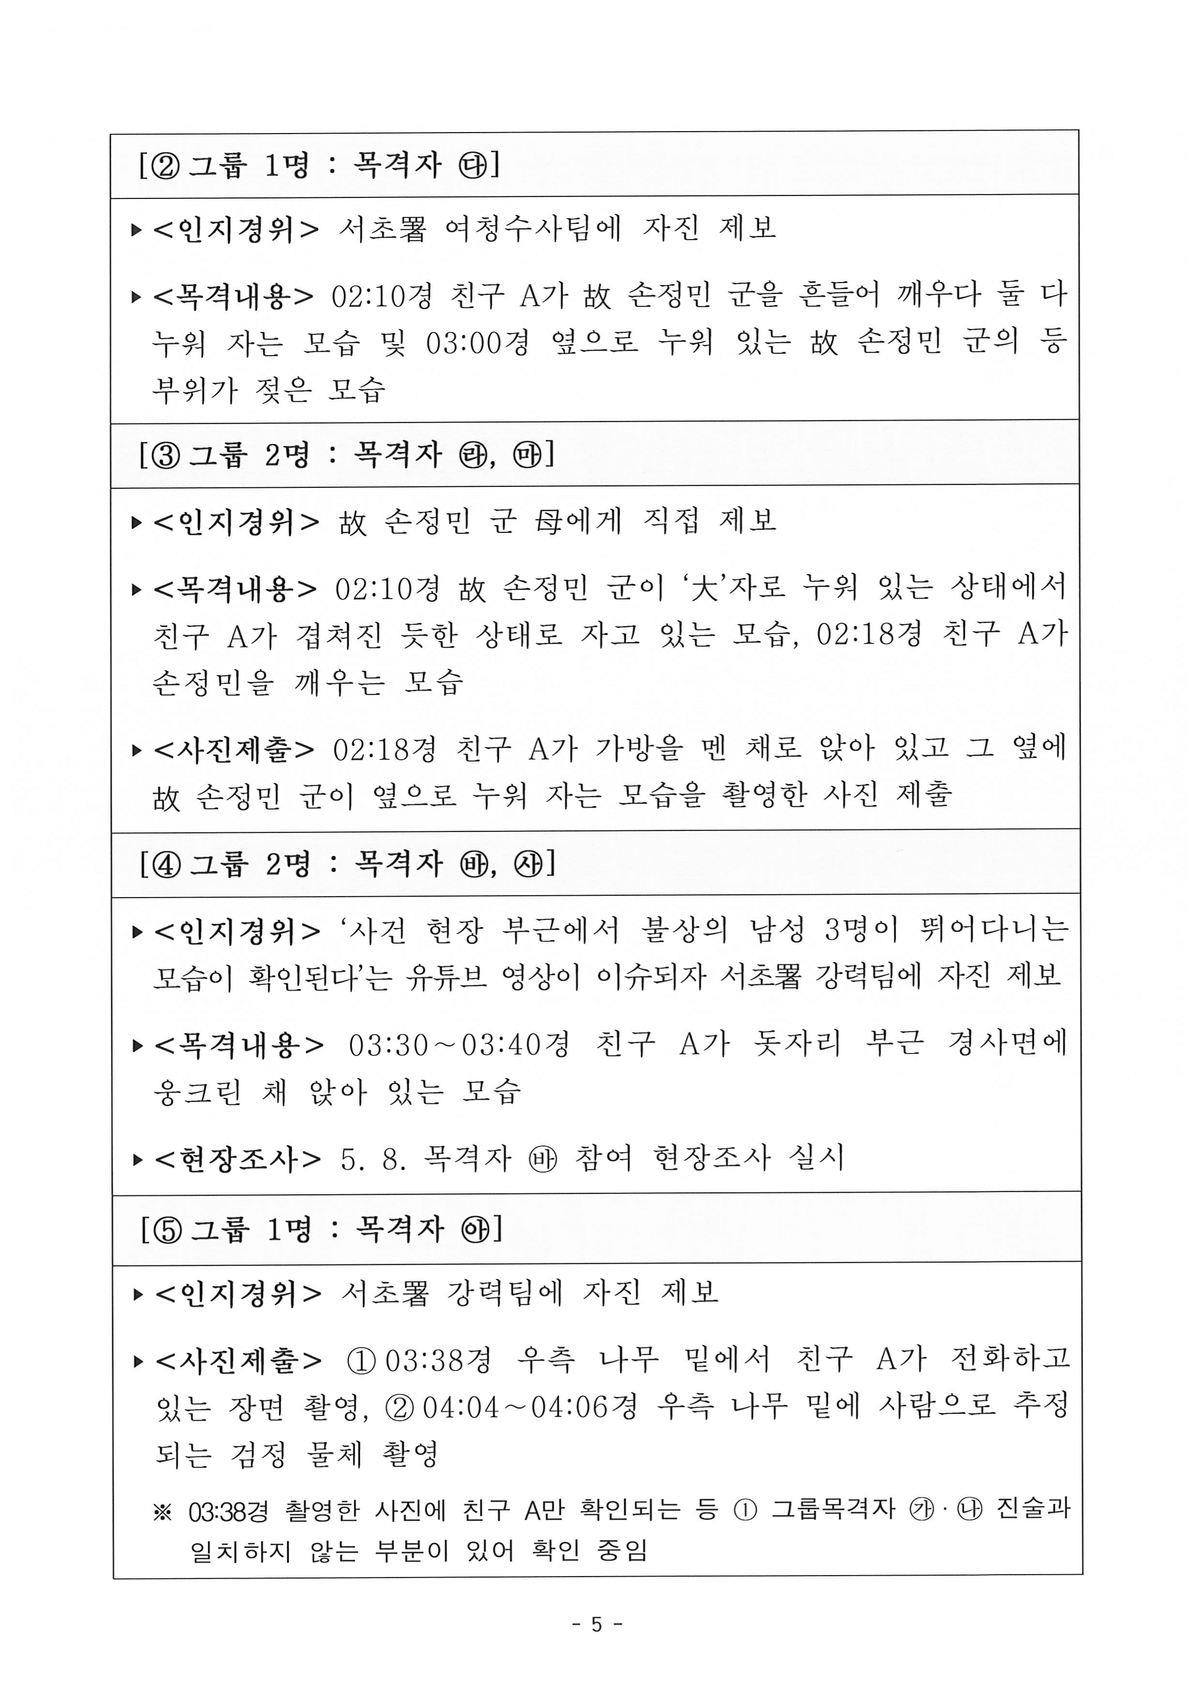 Explanatory data on the death of a university student in the Han River